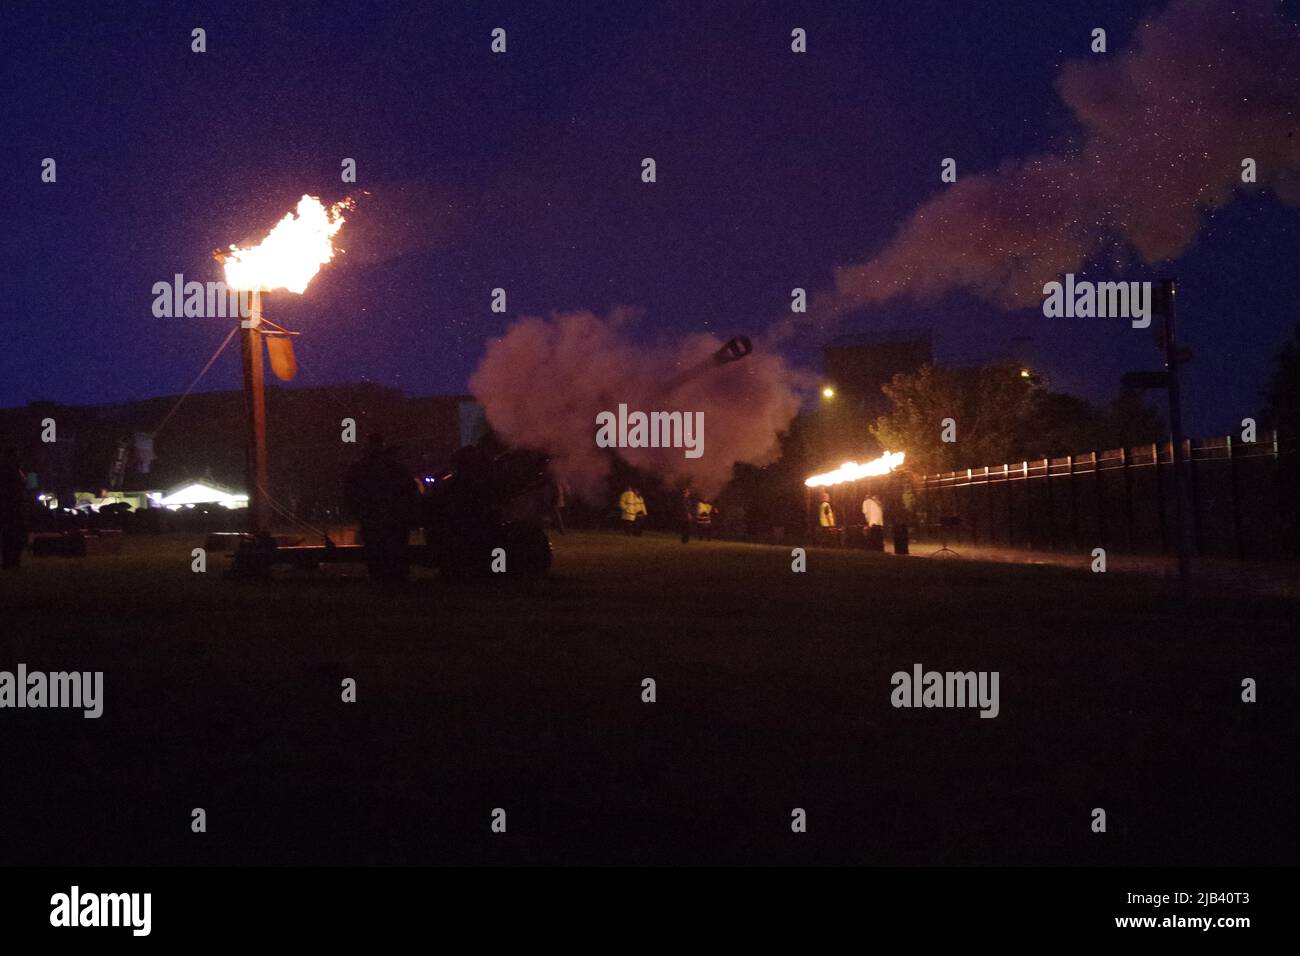 Wallsend, England, 2 June 2022. The 101st Regiment Royal Artillery firing a 105mm gun to announce the end of formal proceedings during the Queen’s Platinum Jubilee event at Segedunum Roman Fort. Credit: Colin Edwards / Alamy Live News Stock Photo